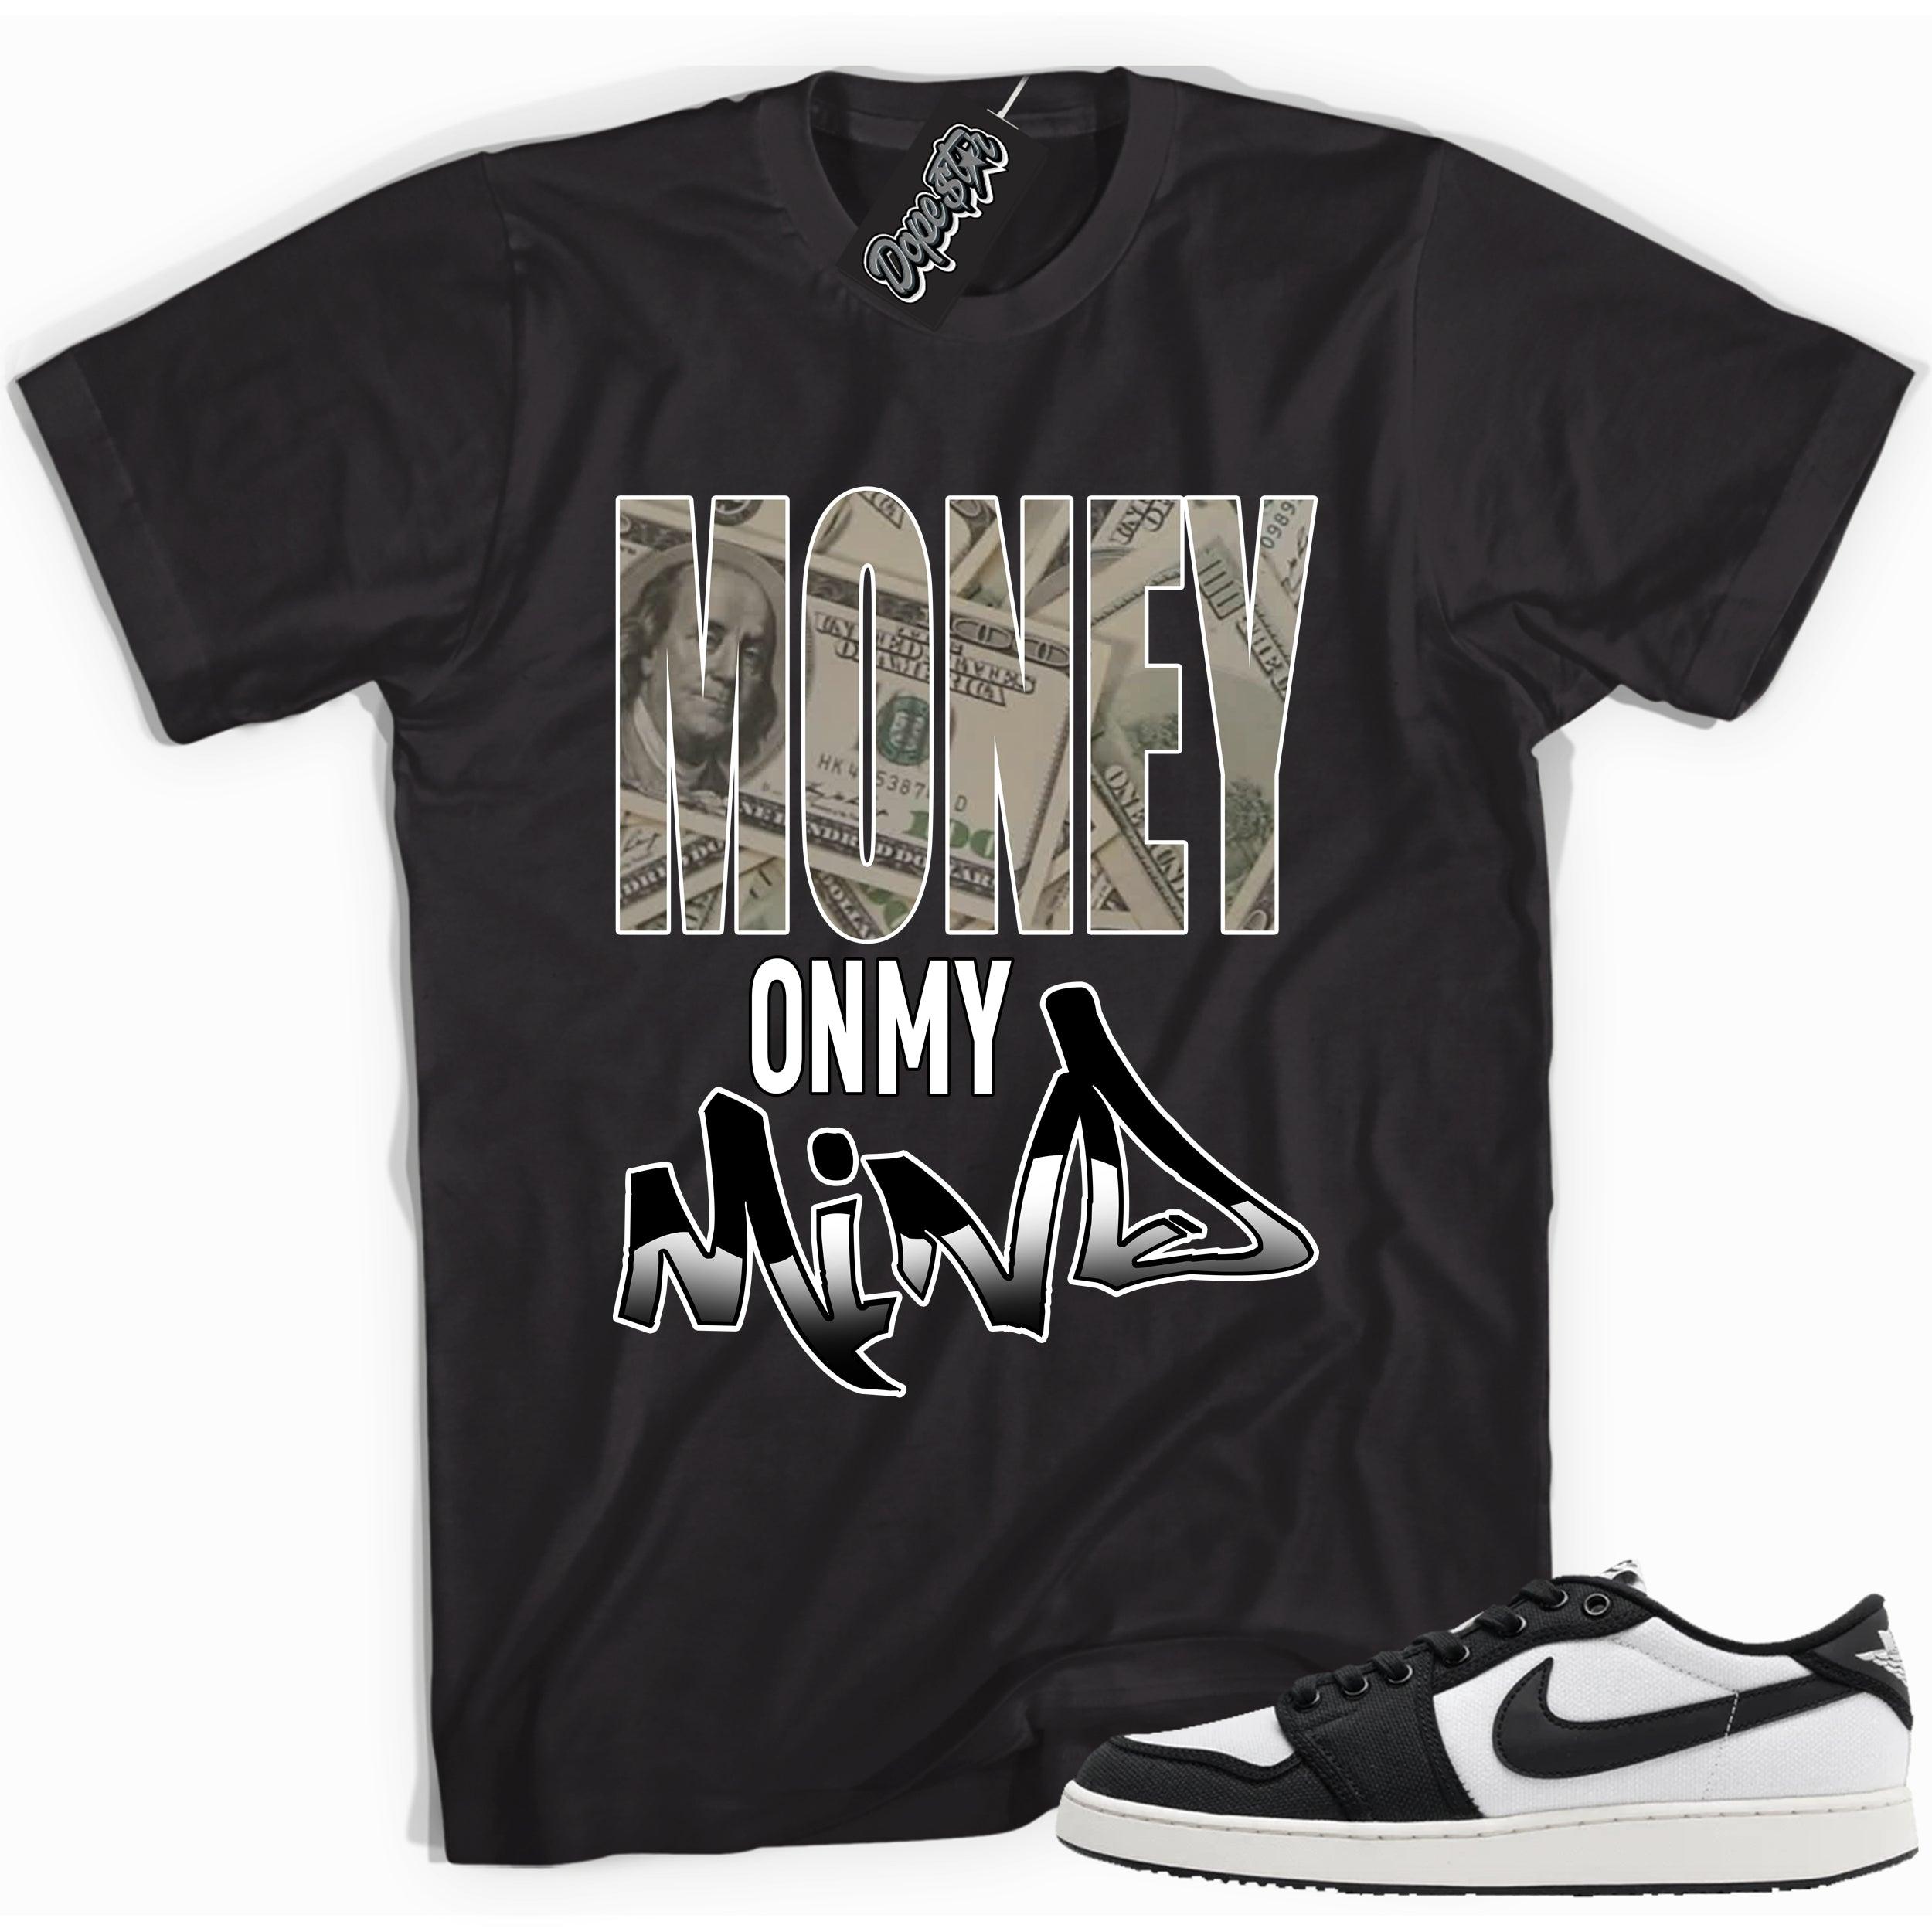 Cool black graphic tee with 'money on my mind' print, that perfectly matches Air Jordan 1 Retro Ajko Low Black & White sneakers.